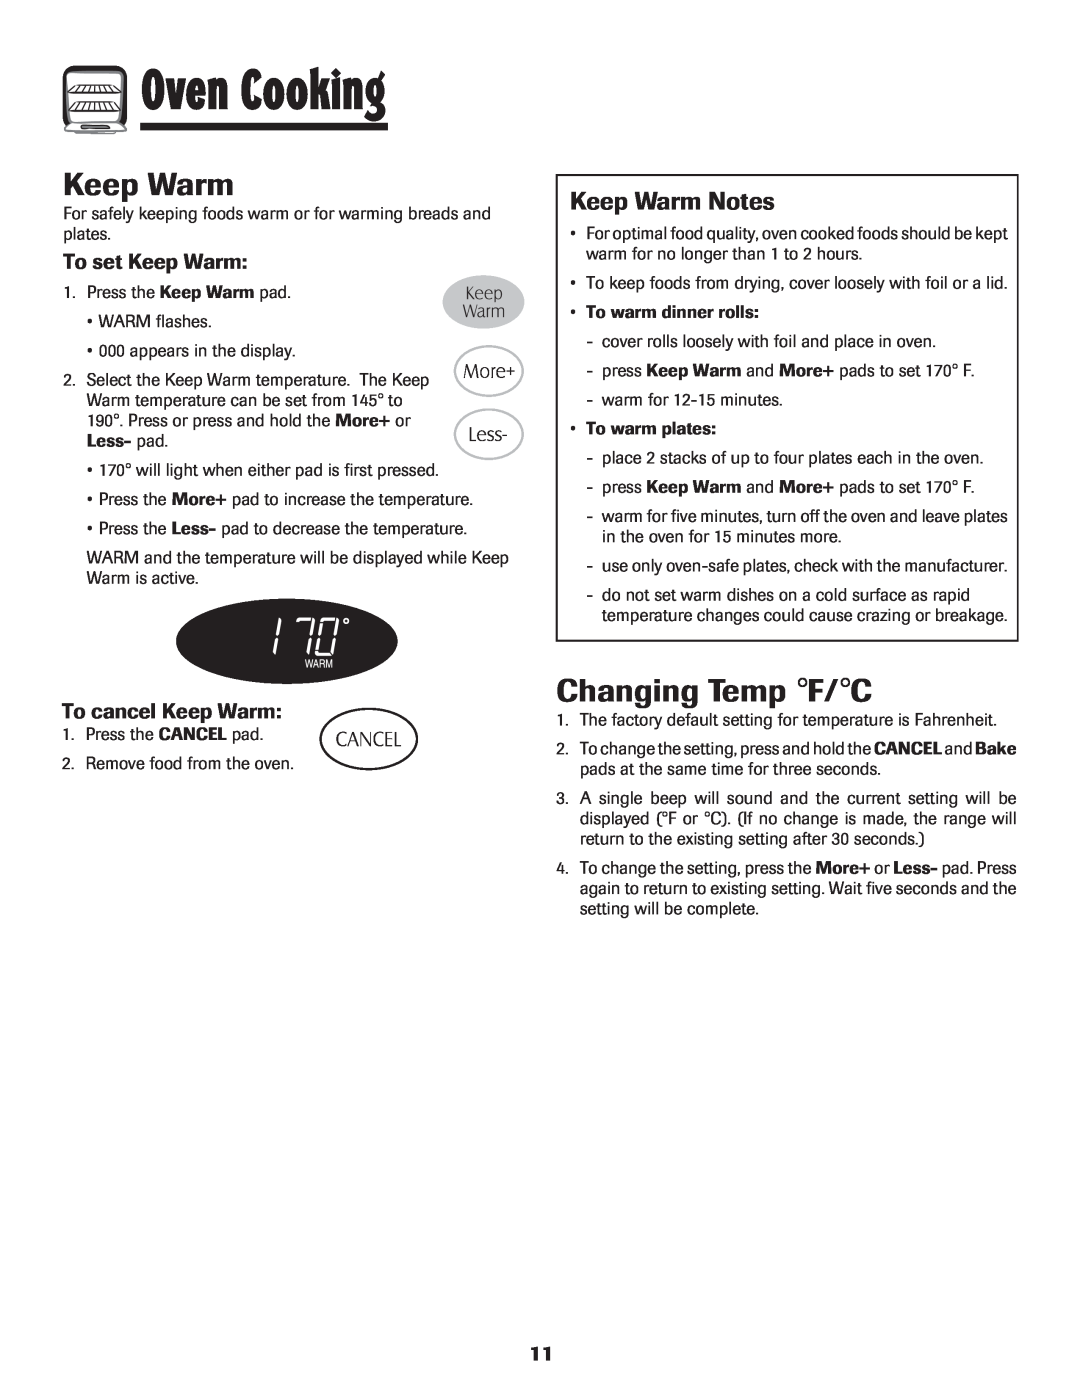 Magic Chef 500 Changing Temp F/C, Keep Warm Notes, To set Keep Warm, To cancel Keep Warm, Oven Cooking 